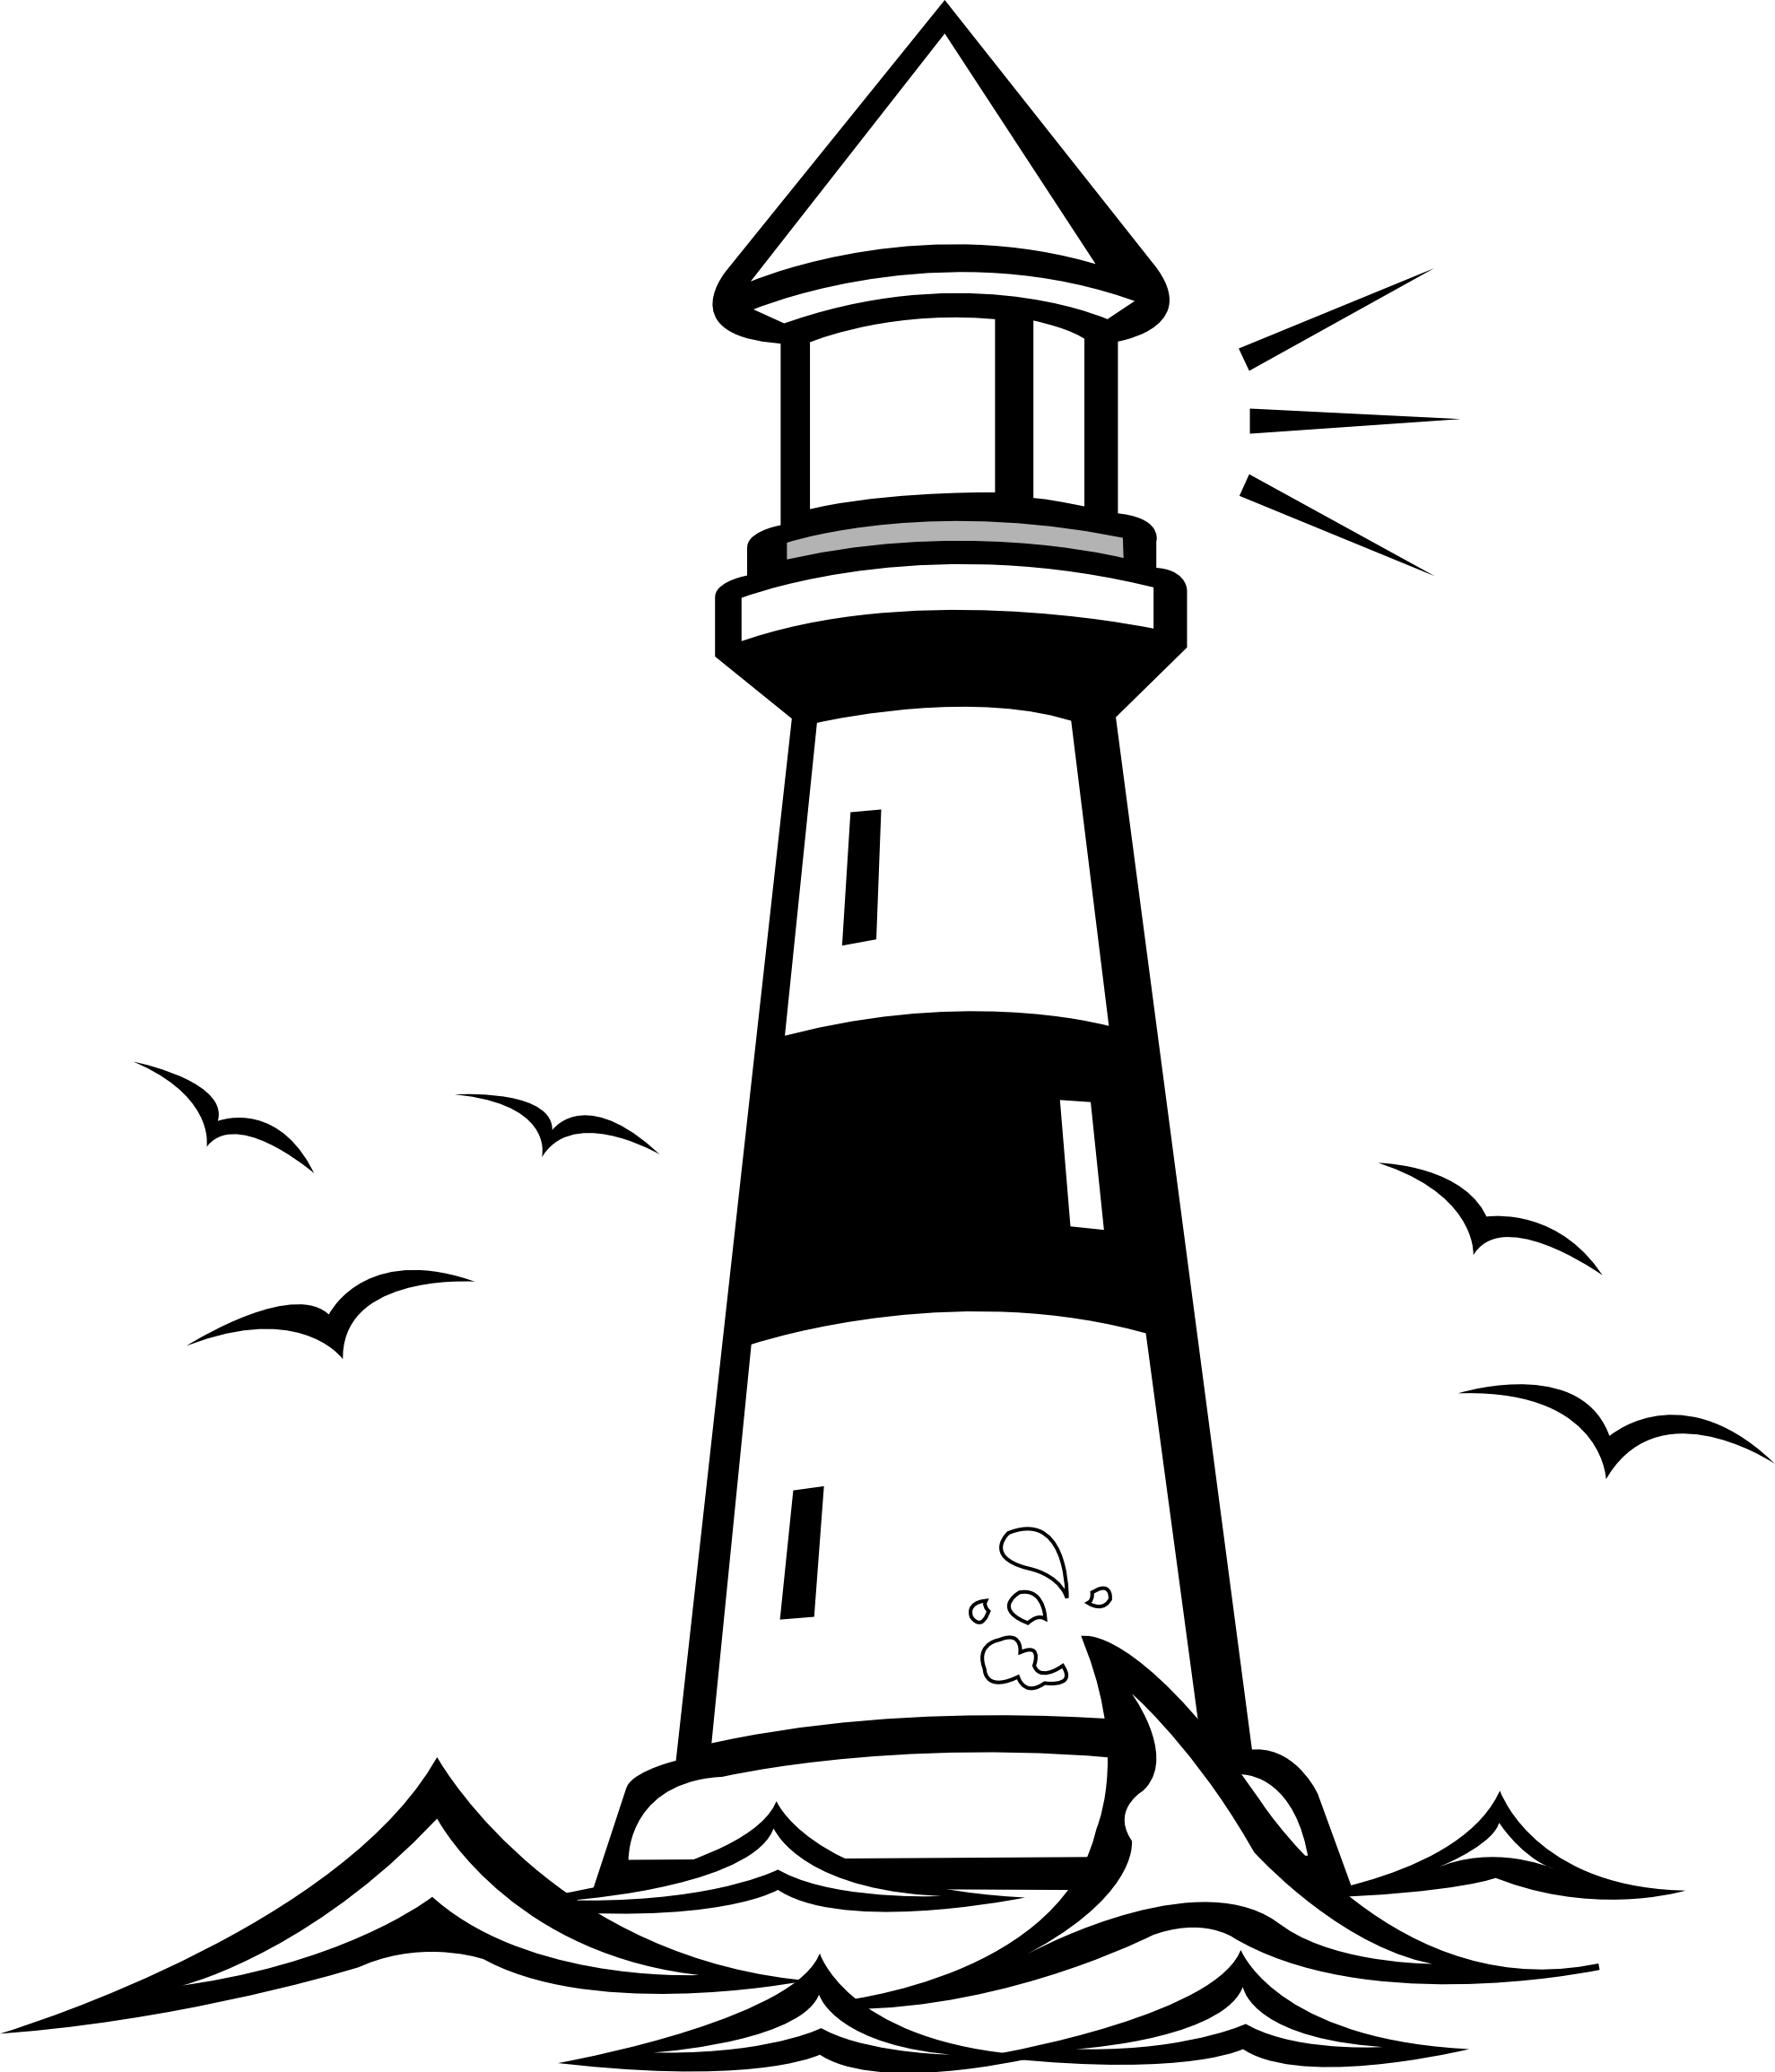 Lighthouse Clip Art With Light Shining | Clipart Panda - Free ...